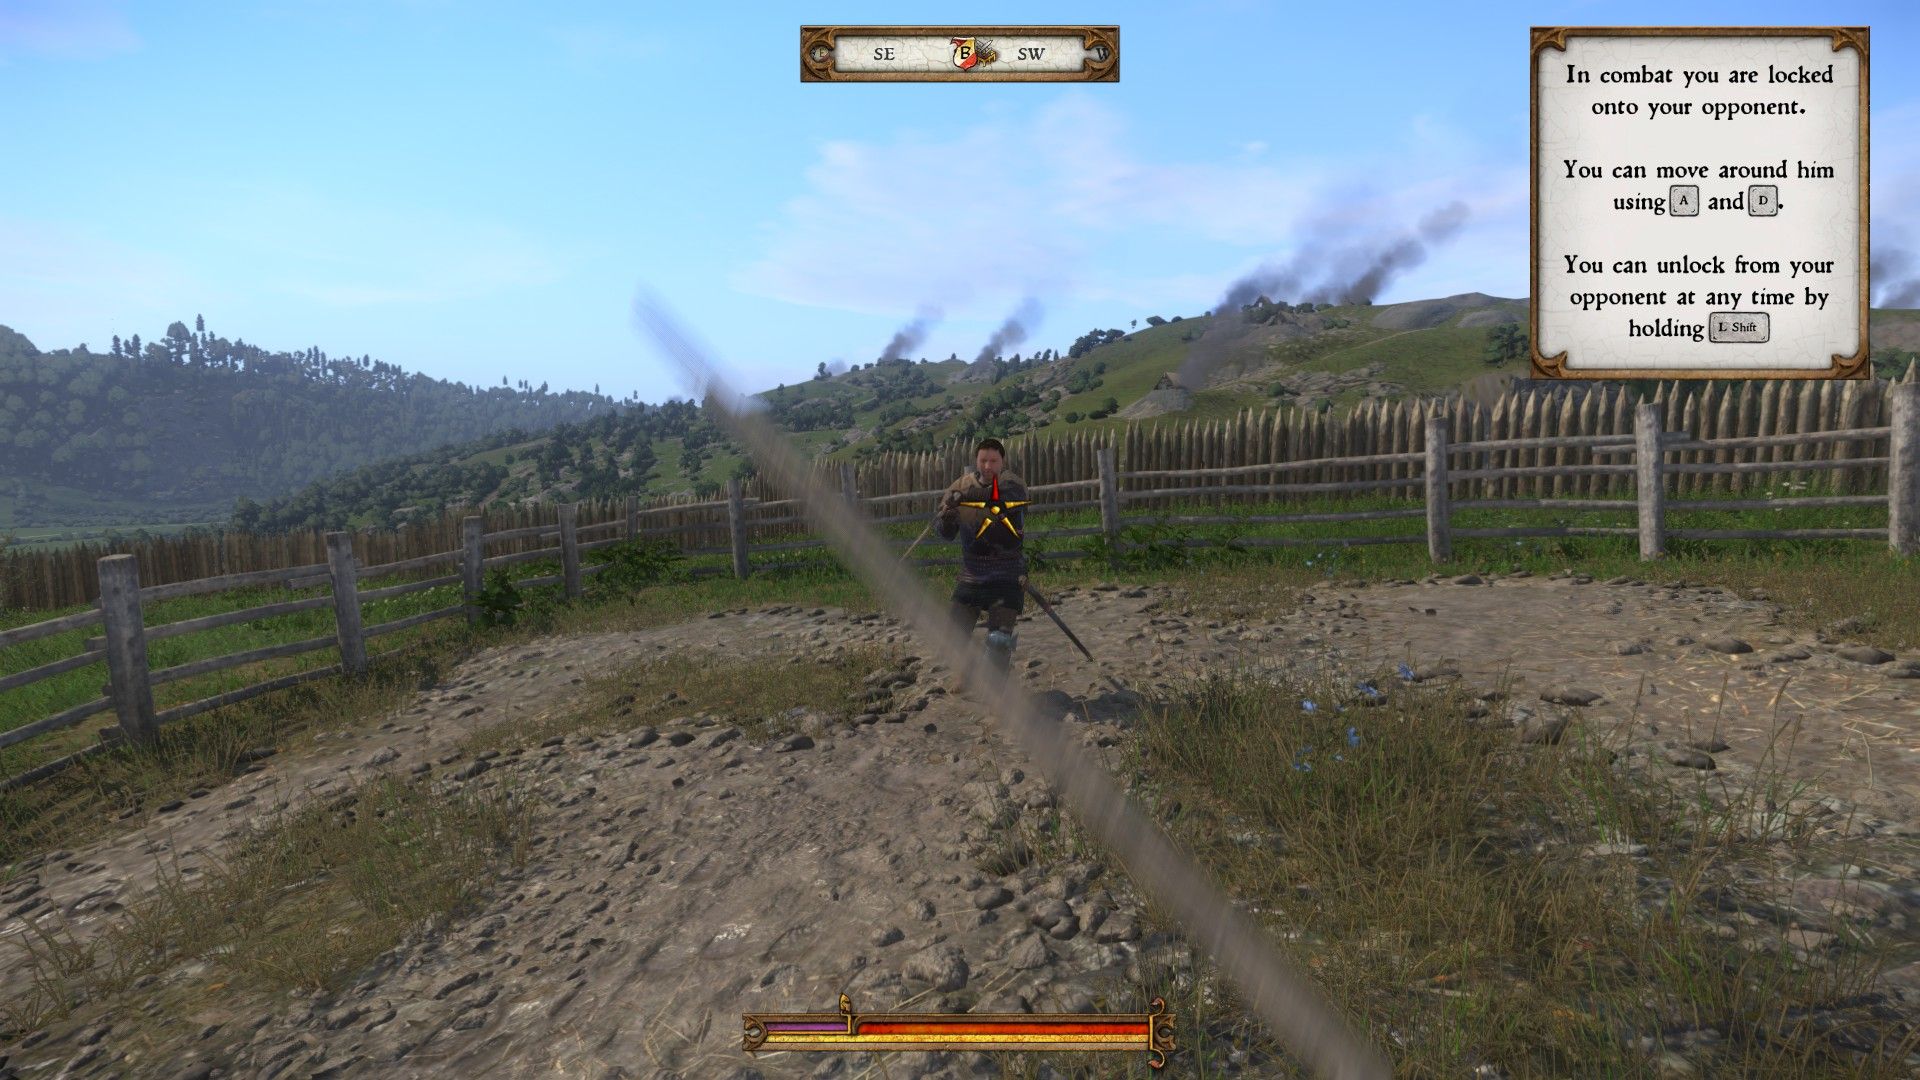 With lame fighting, you probably won't need many kingdom come deliverance combat tips